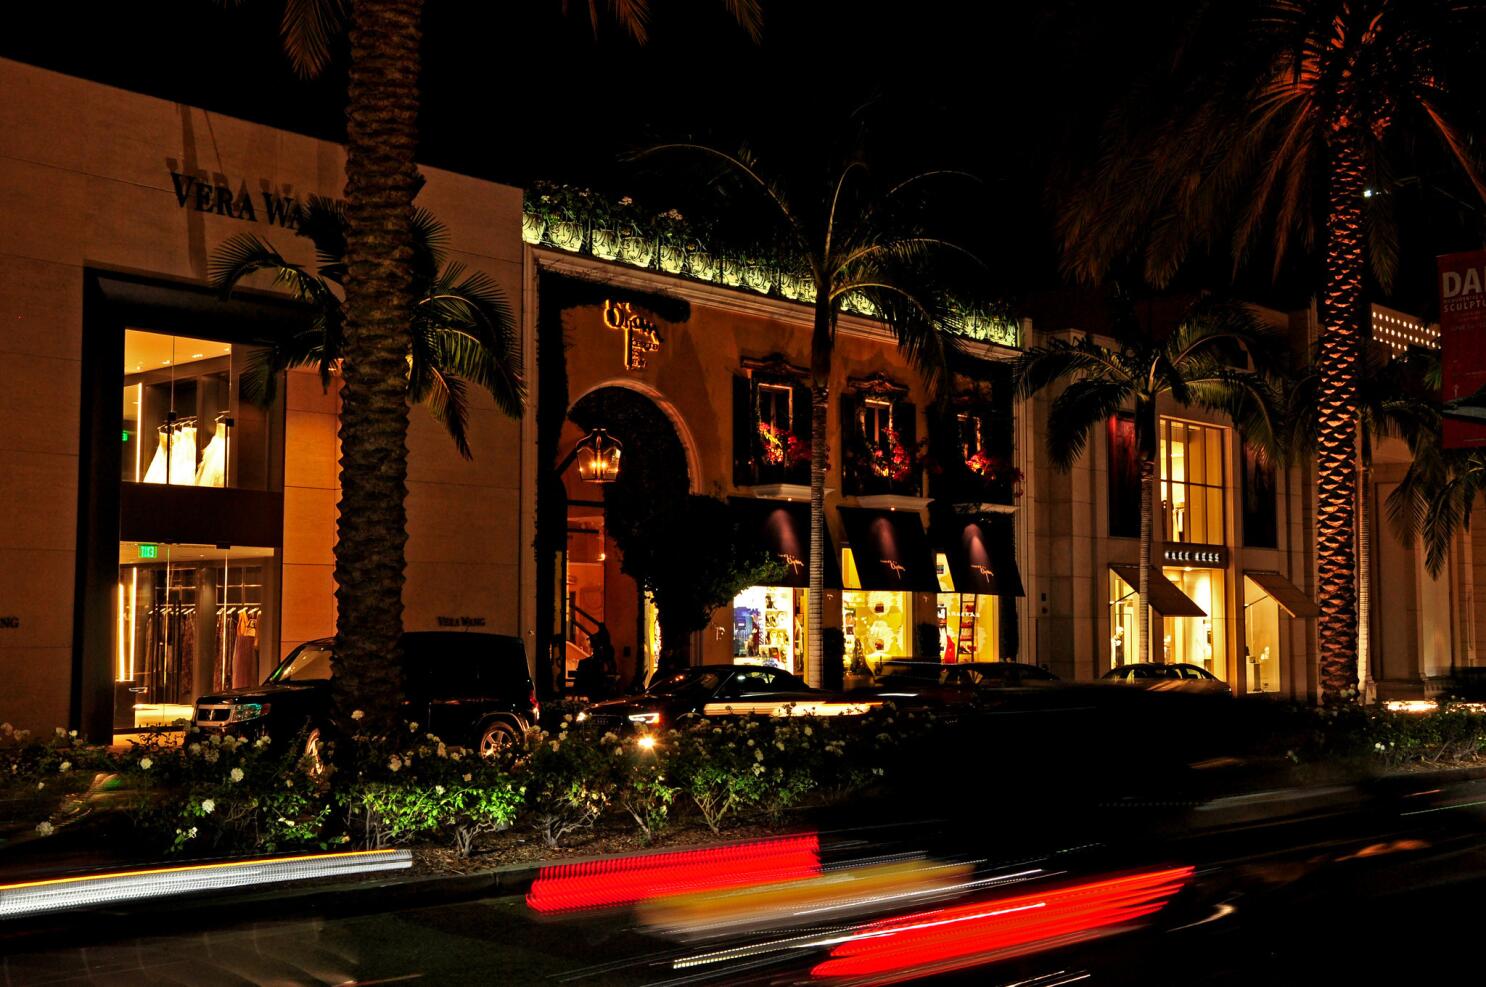 Louis Vuitton on Rodeo Drive in Beverly Hills. Photo by, George